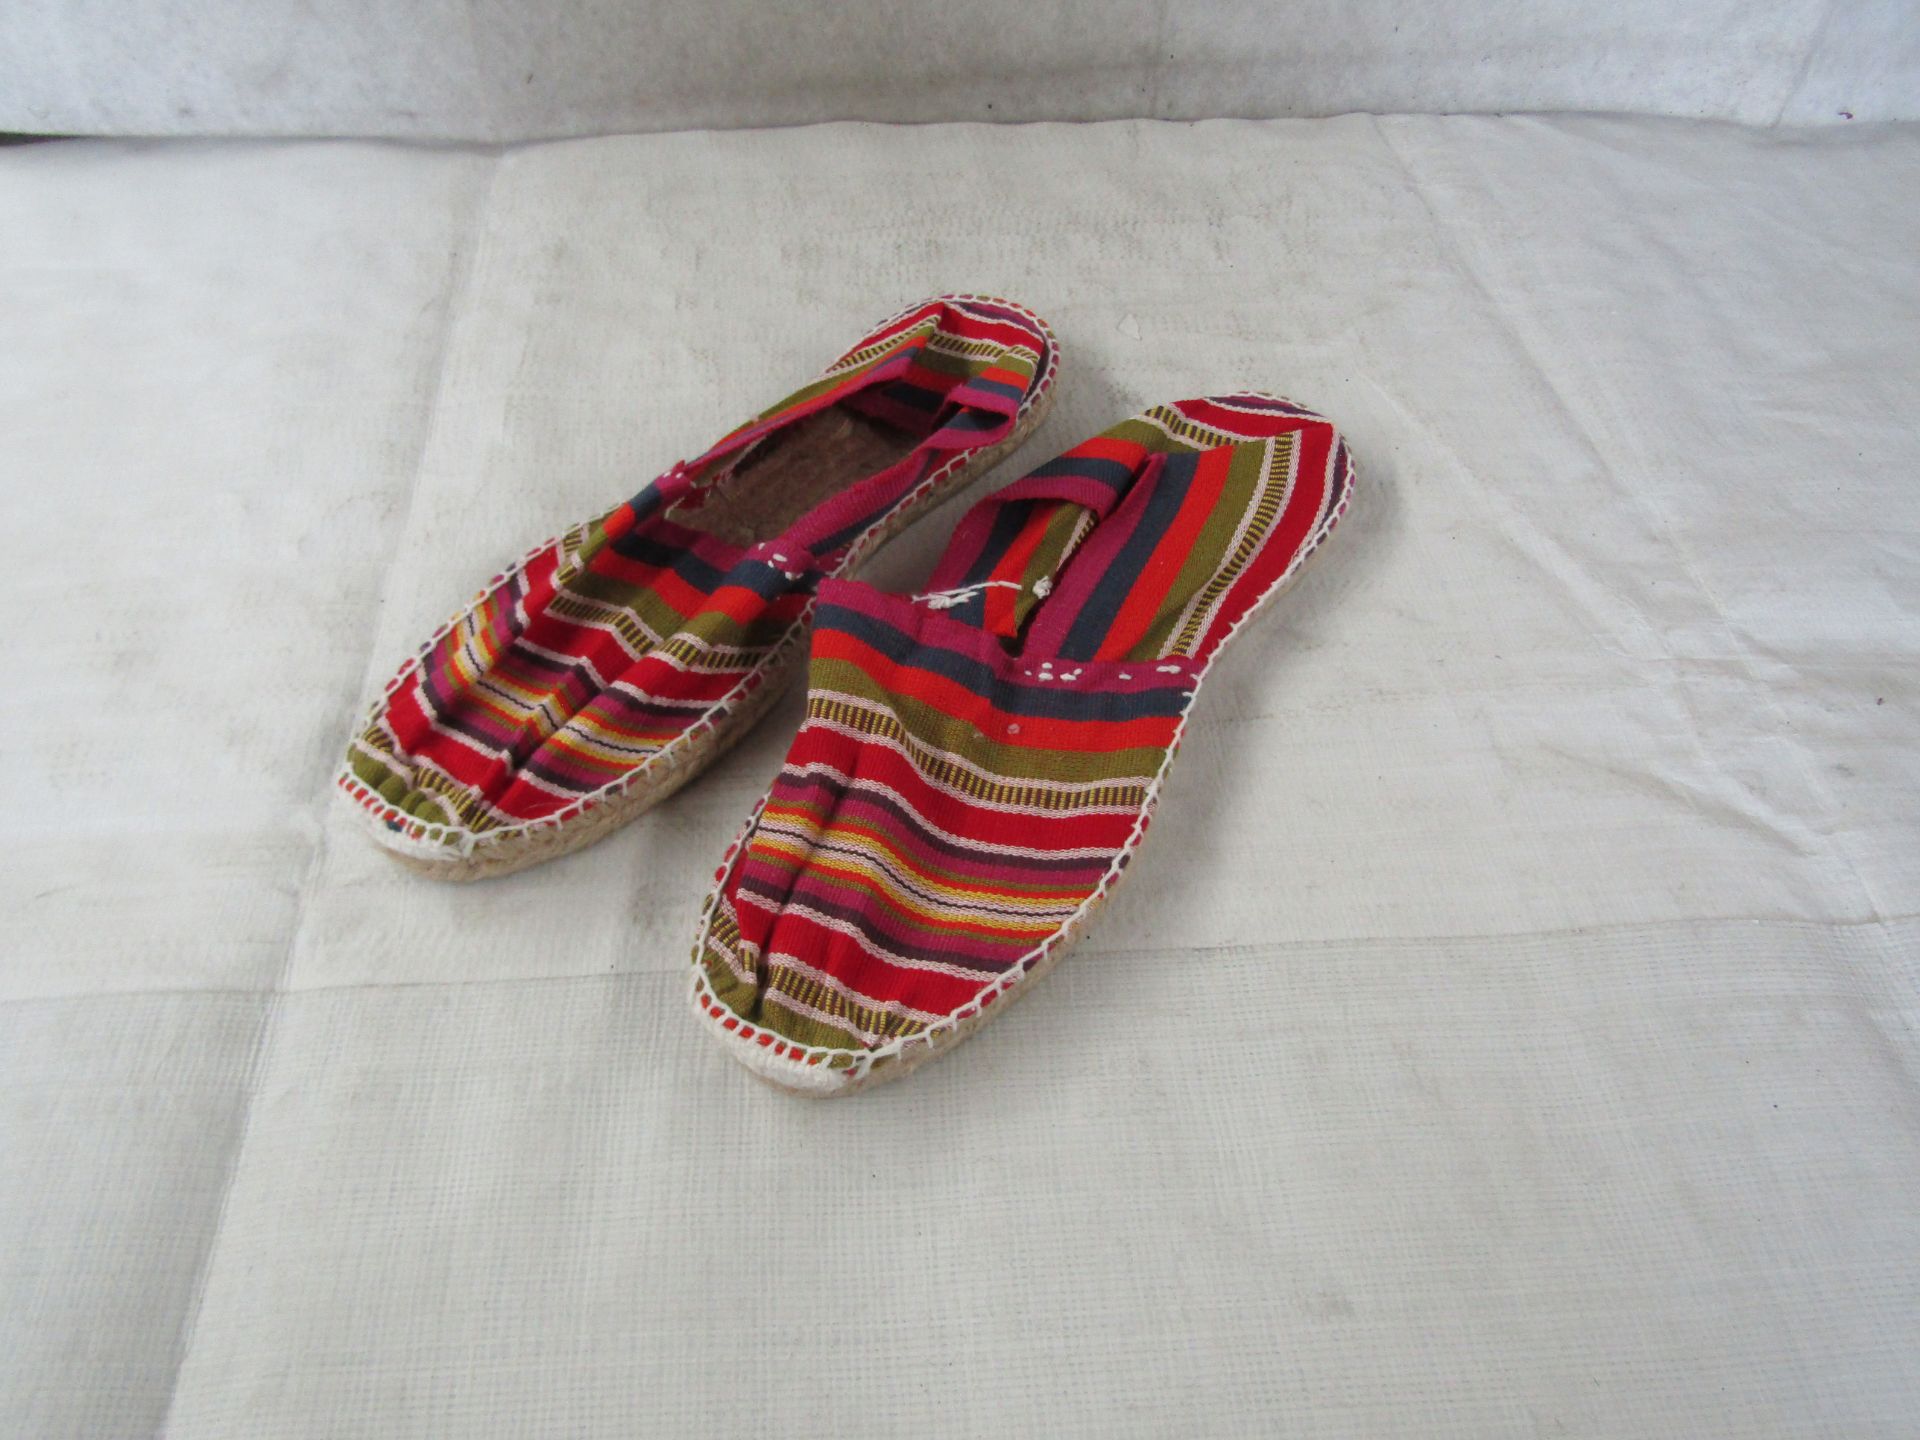 TheStripeCompany - Slip-On Espadrilles Shoes - See Image For Design - Size 42 - New.